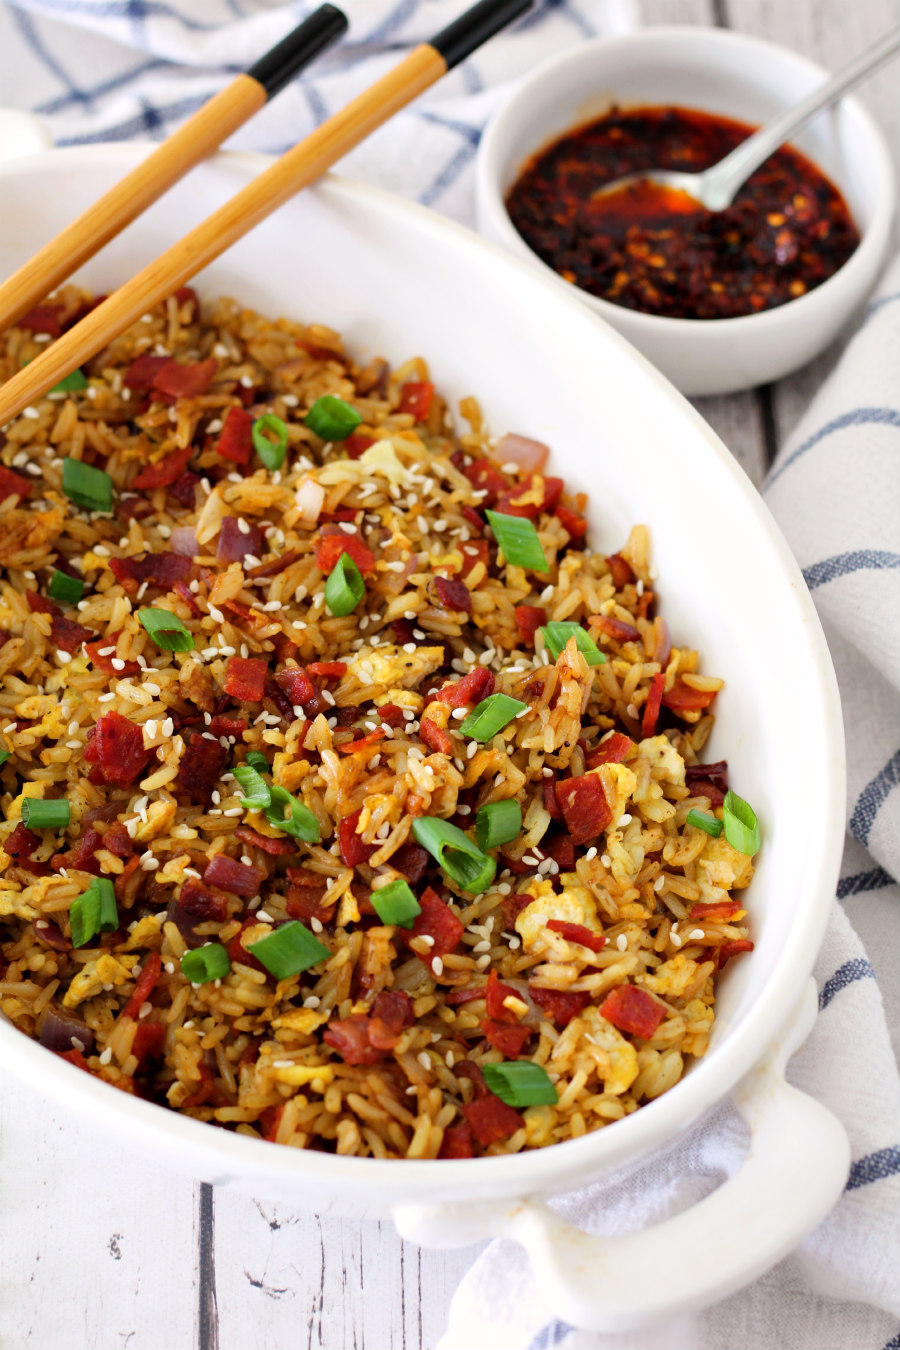 Bacon and Chorizo Fried Rice in a white serving dish with chopsticks sitting on the edge. Hot chili crisp and kitchen towels in the background.